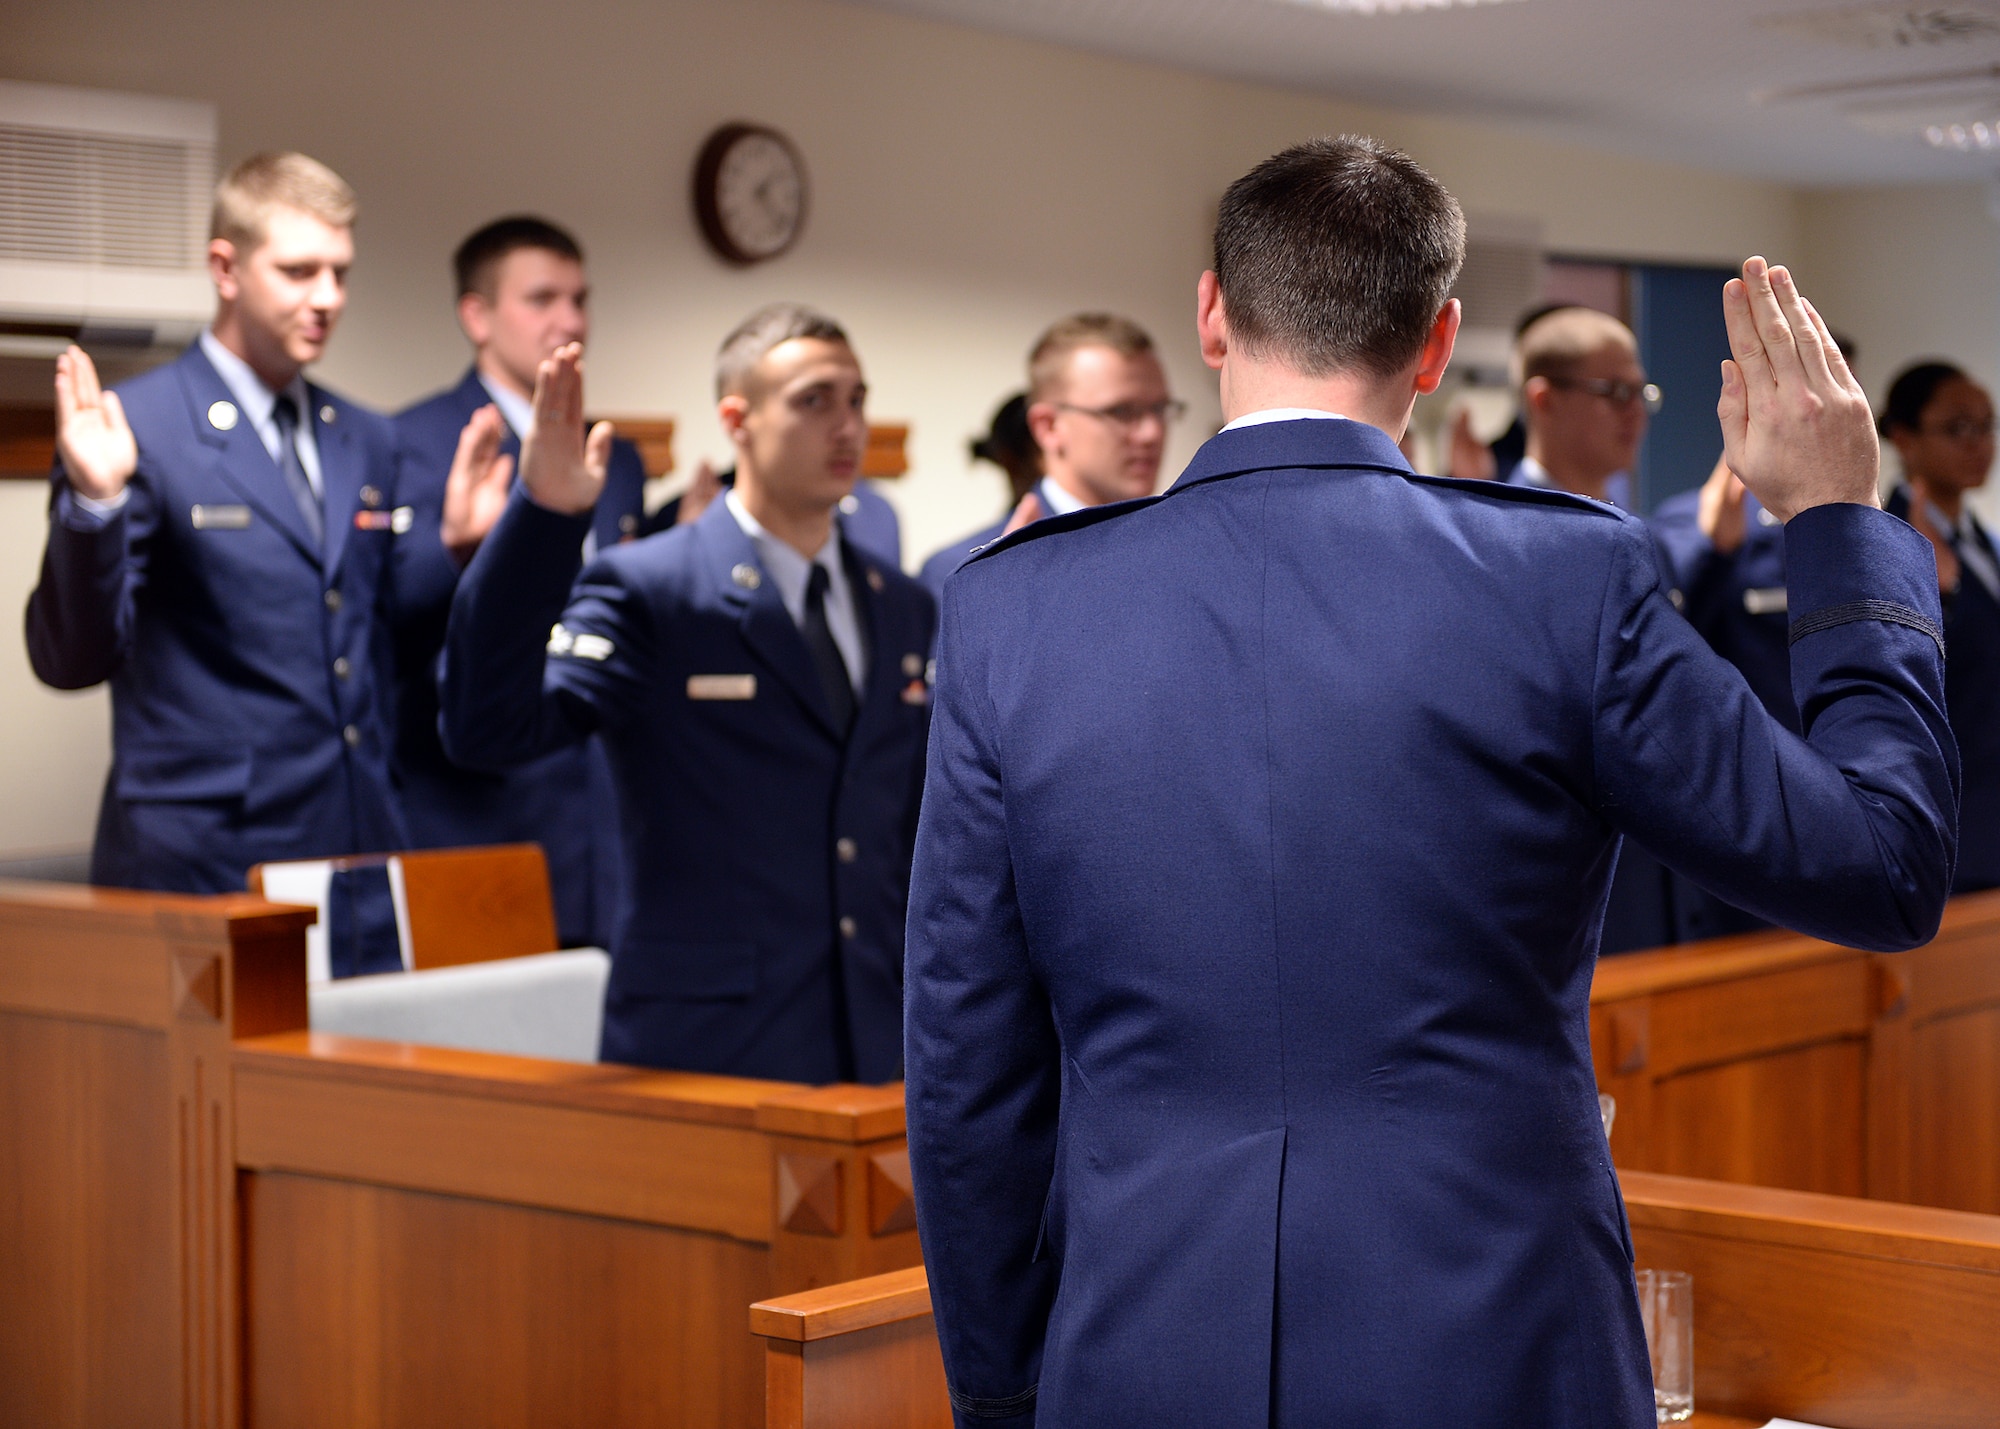 SPANGDAHLEM AIR BASE, Germany -- U.S. Air Force Capt. Samuel Welch, 52nd Fighter Wing Judge Advocate chief of military justice from Fort Worth, Texas, swears in jury panel members Oct. 24, 2013, at the 52nd Fighter Wing legal office courtroom during Spangdahlem's interactive sexual assault prevention campaign, "Got Consent?" Most Airmen on the panel completed less than one year of military service. The training provides an opportunity for first-term Airmen to learn about the legal process early in their careers. (U.S. Air Force photo by Staff Sgt. Daryl Knee/Released)